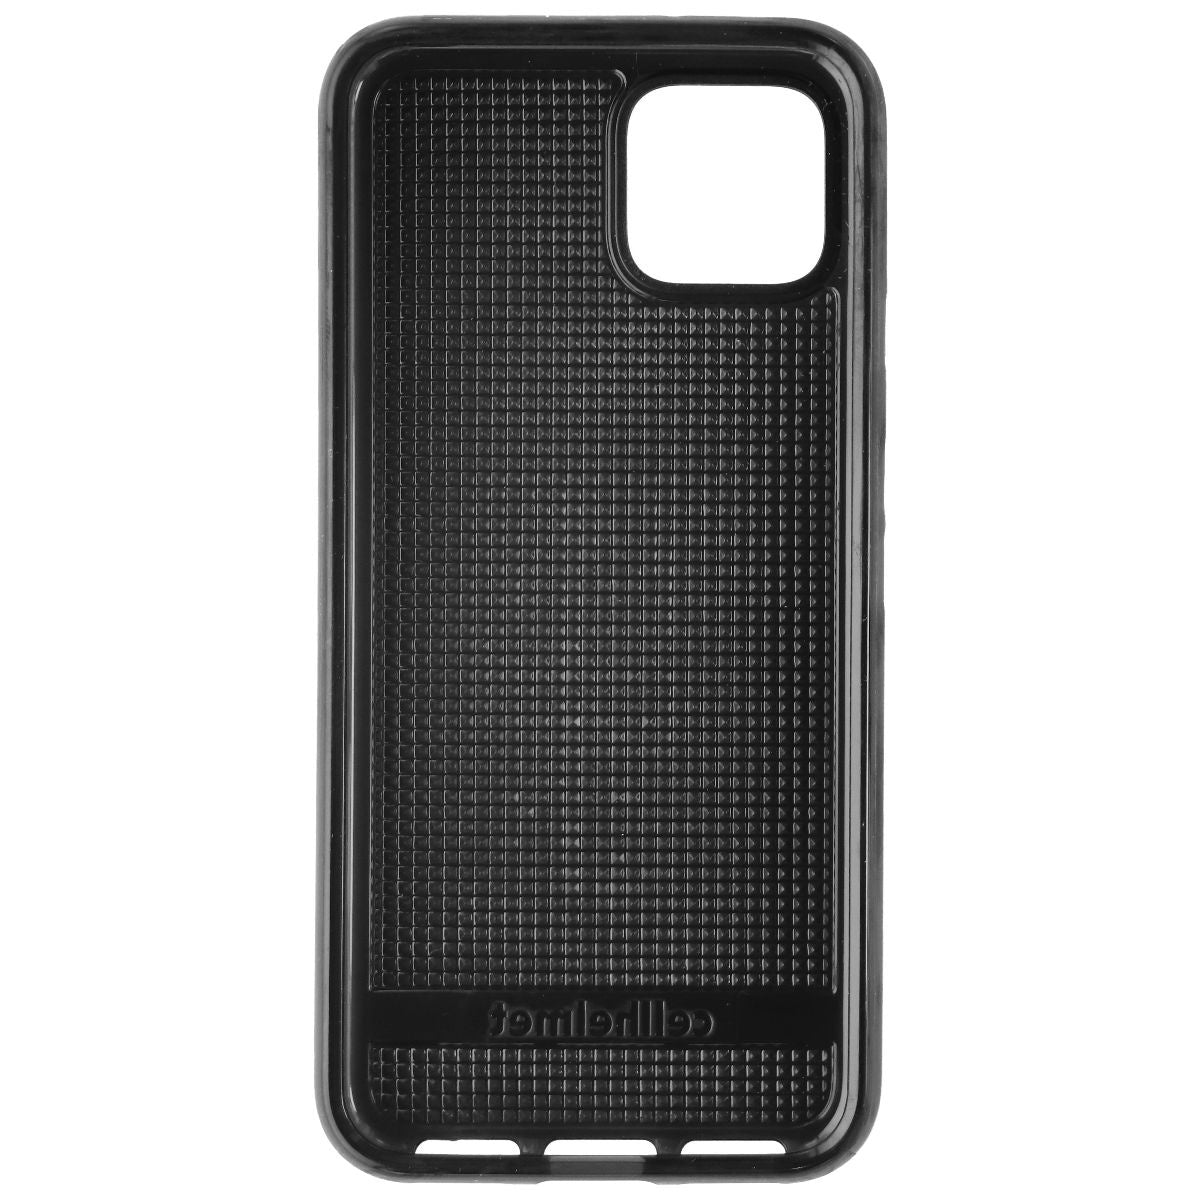 DO NOT USE - Please Check U13570 Family Cell Phone - Cases, Covers & Skins CellHelmet    - Simple Cell Bulk Wholesale Pricing - USA Seller